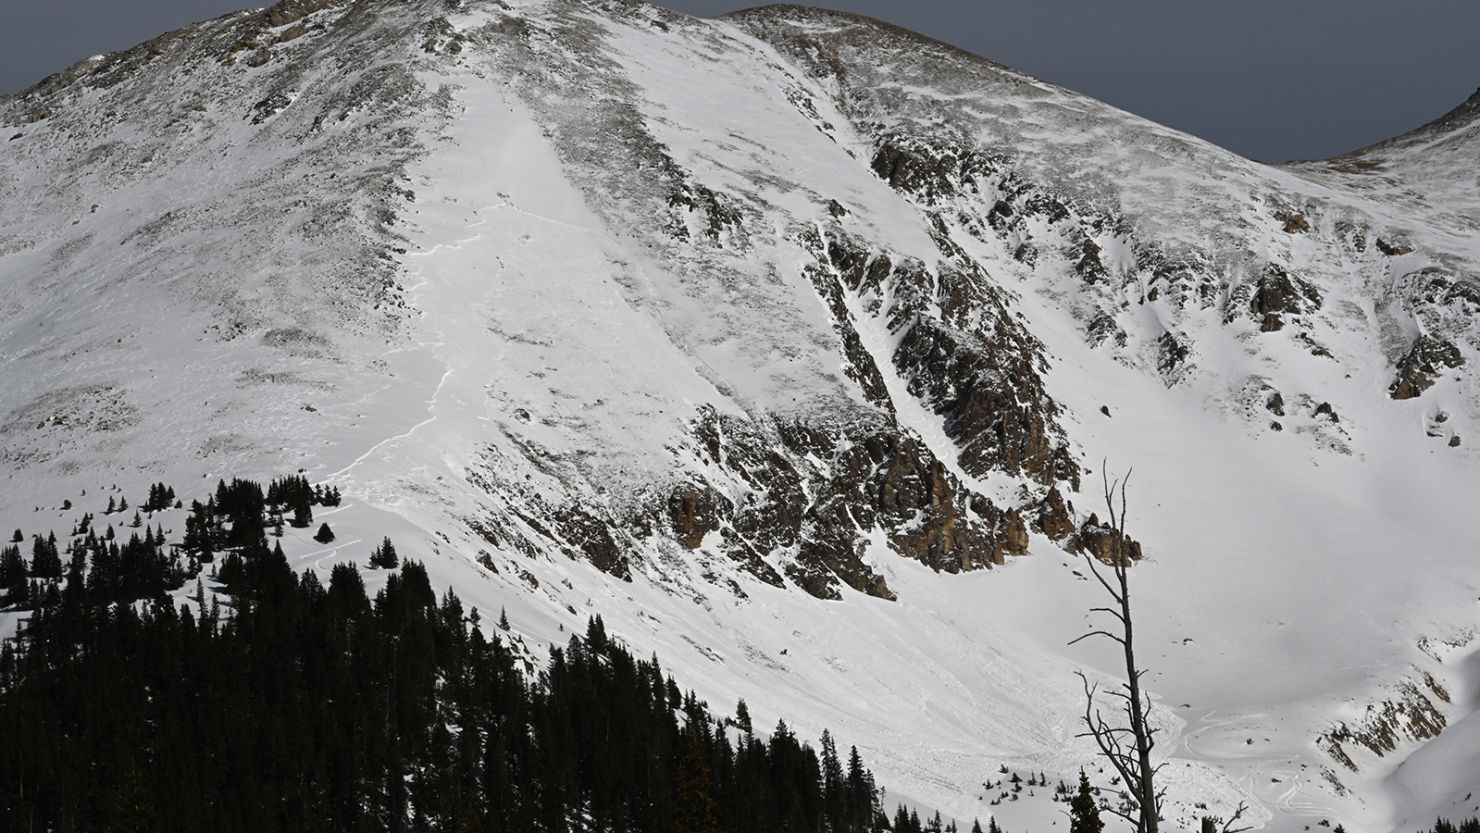 Skier Survives Fall Off 150 Foot Cliff 